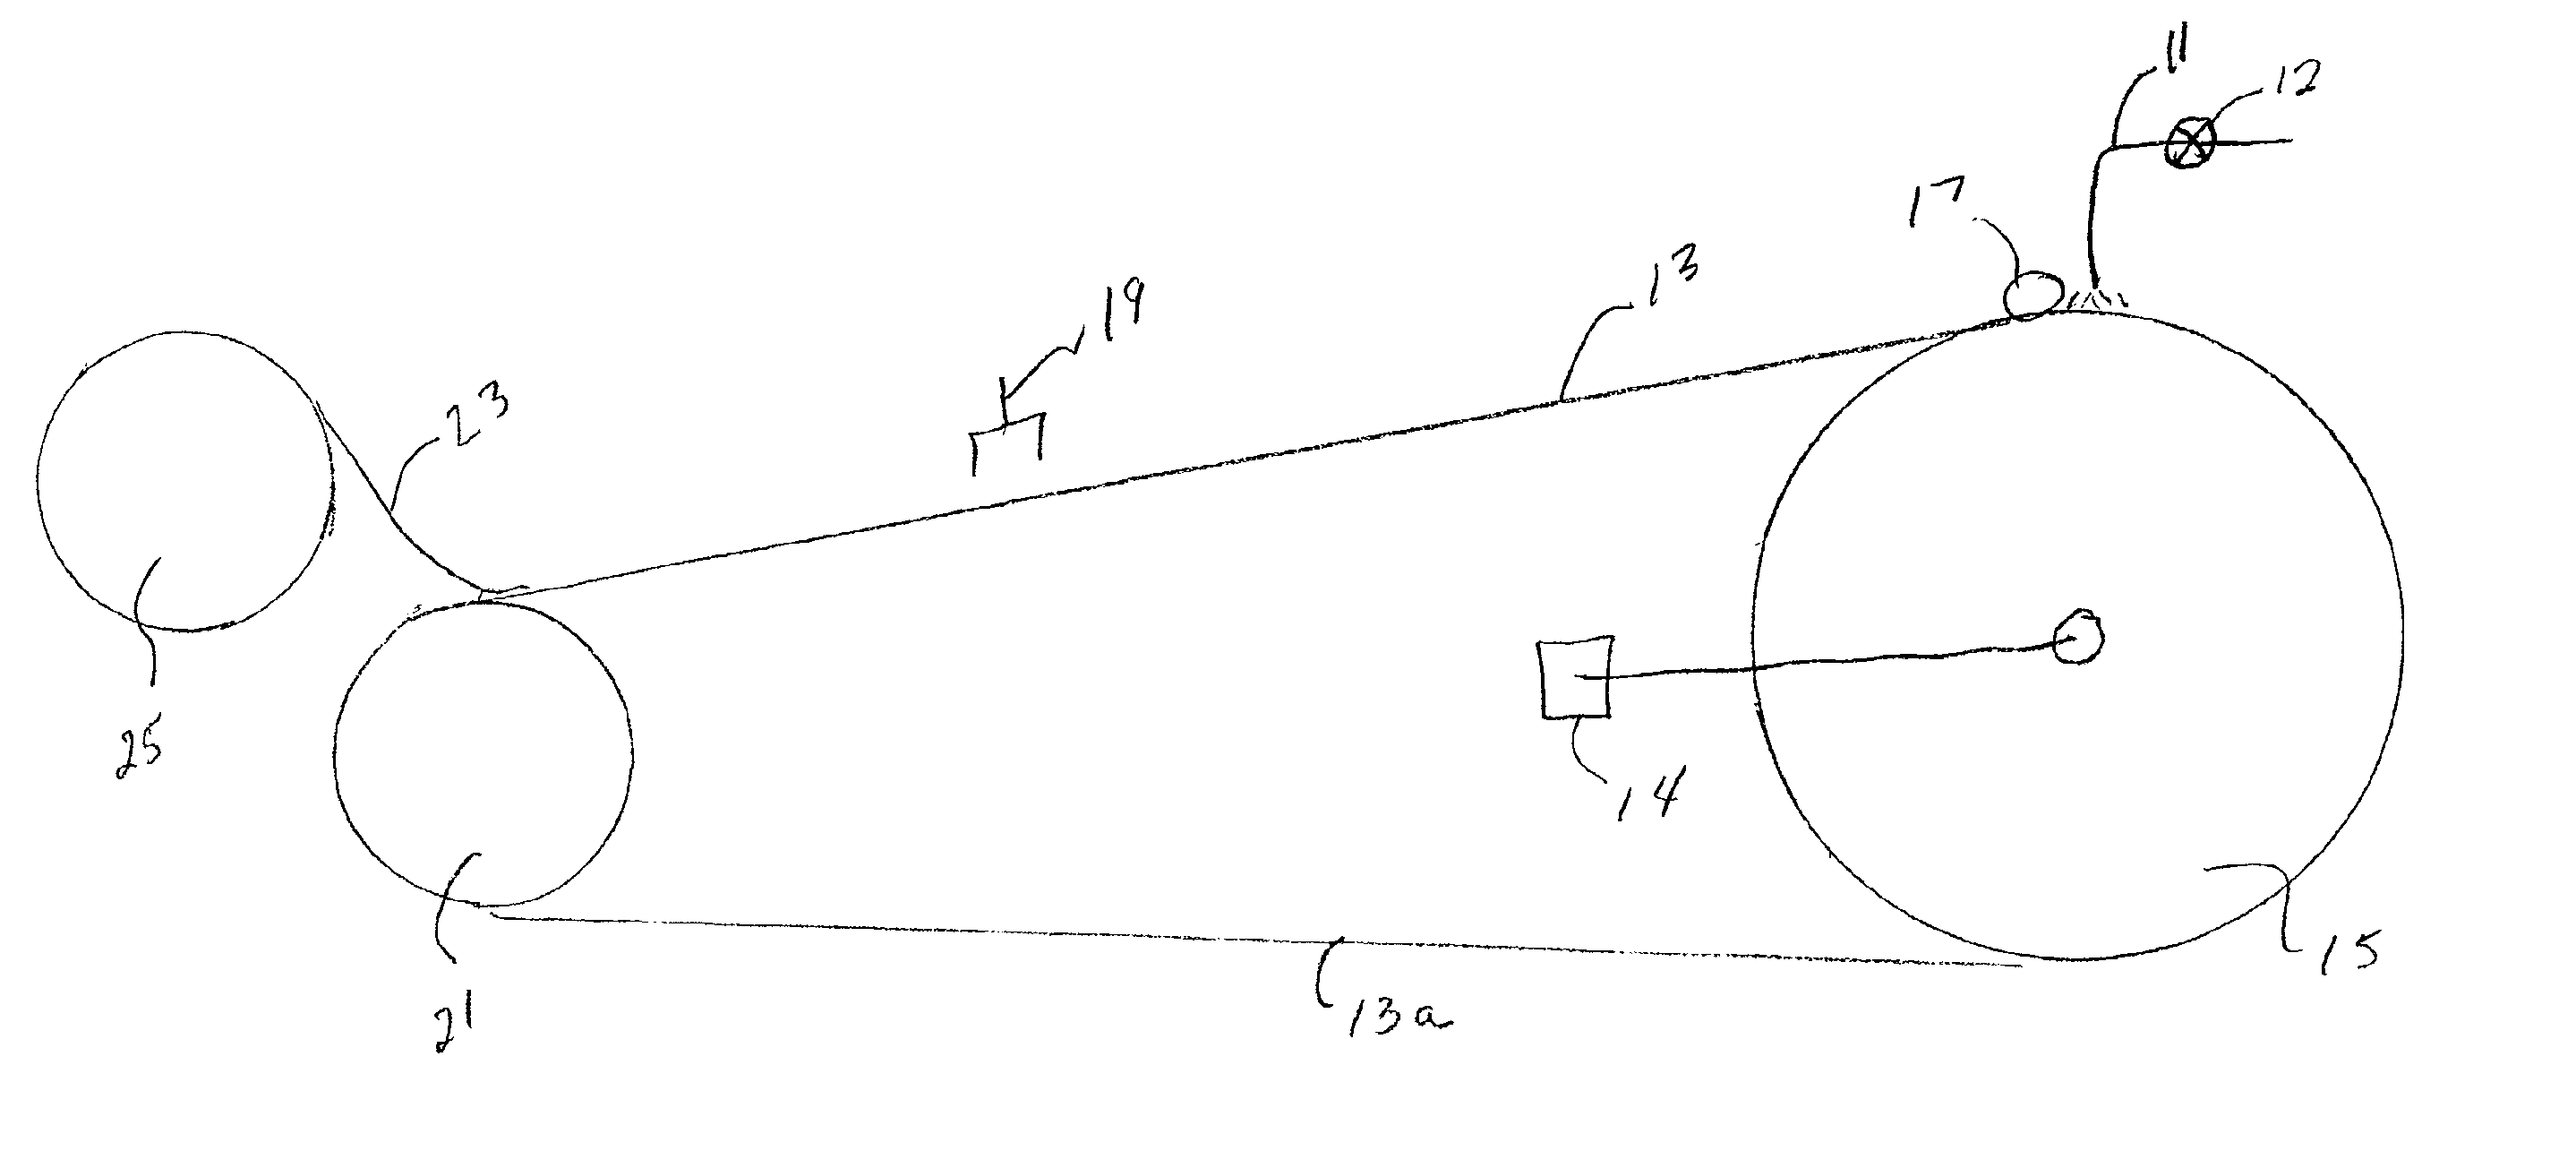 Method and apparatus for manufacturing latex free materials